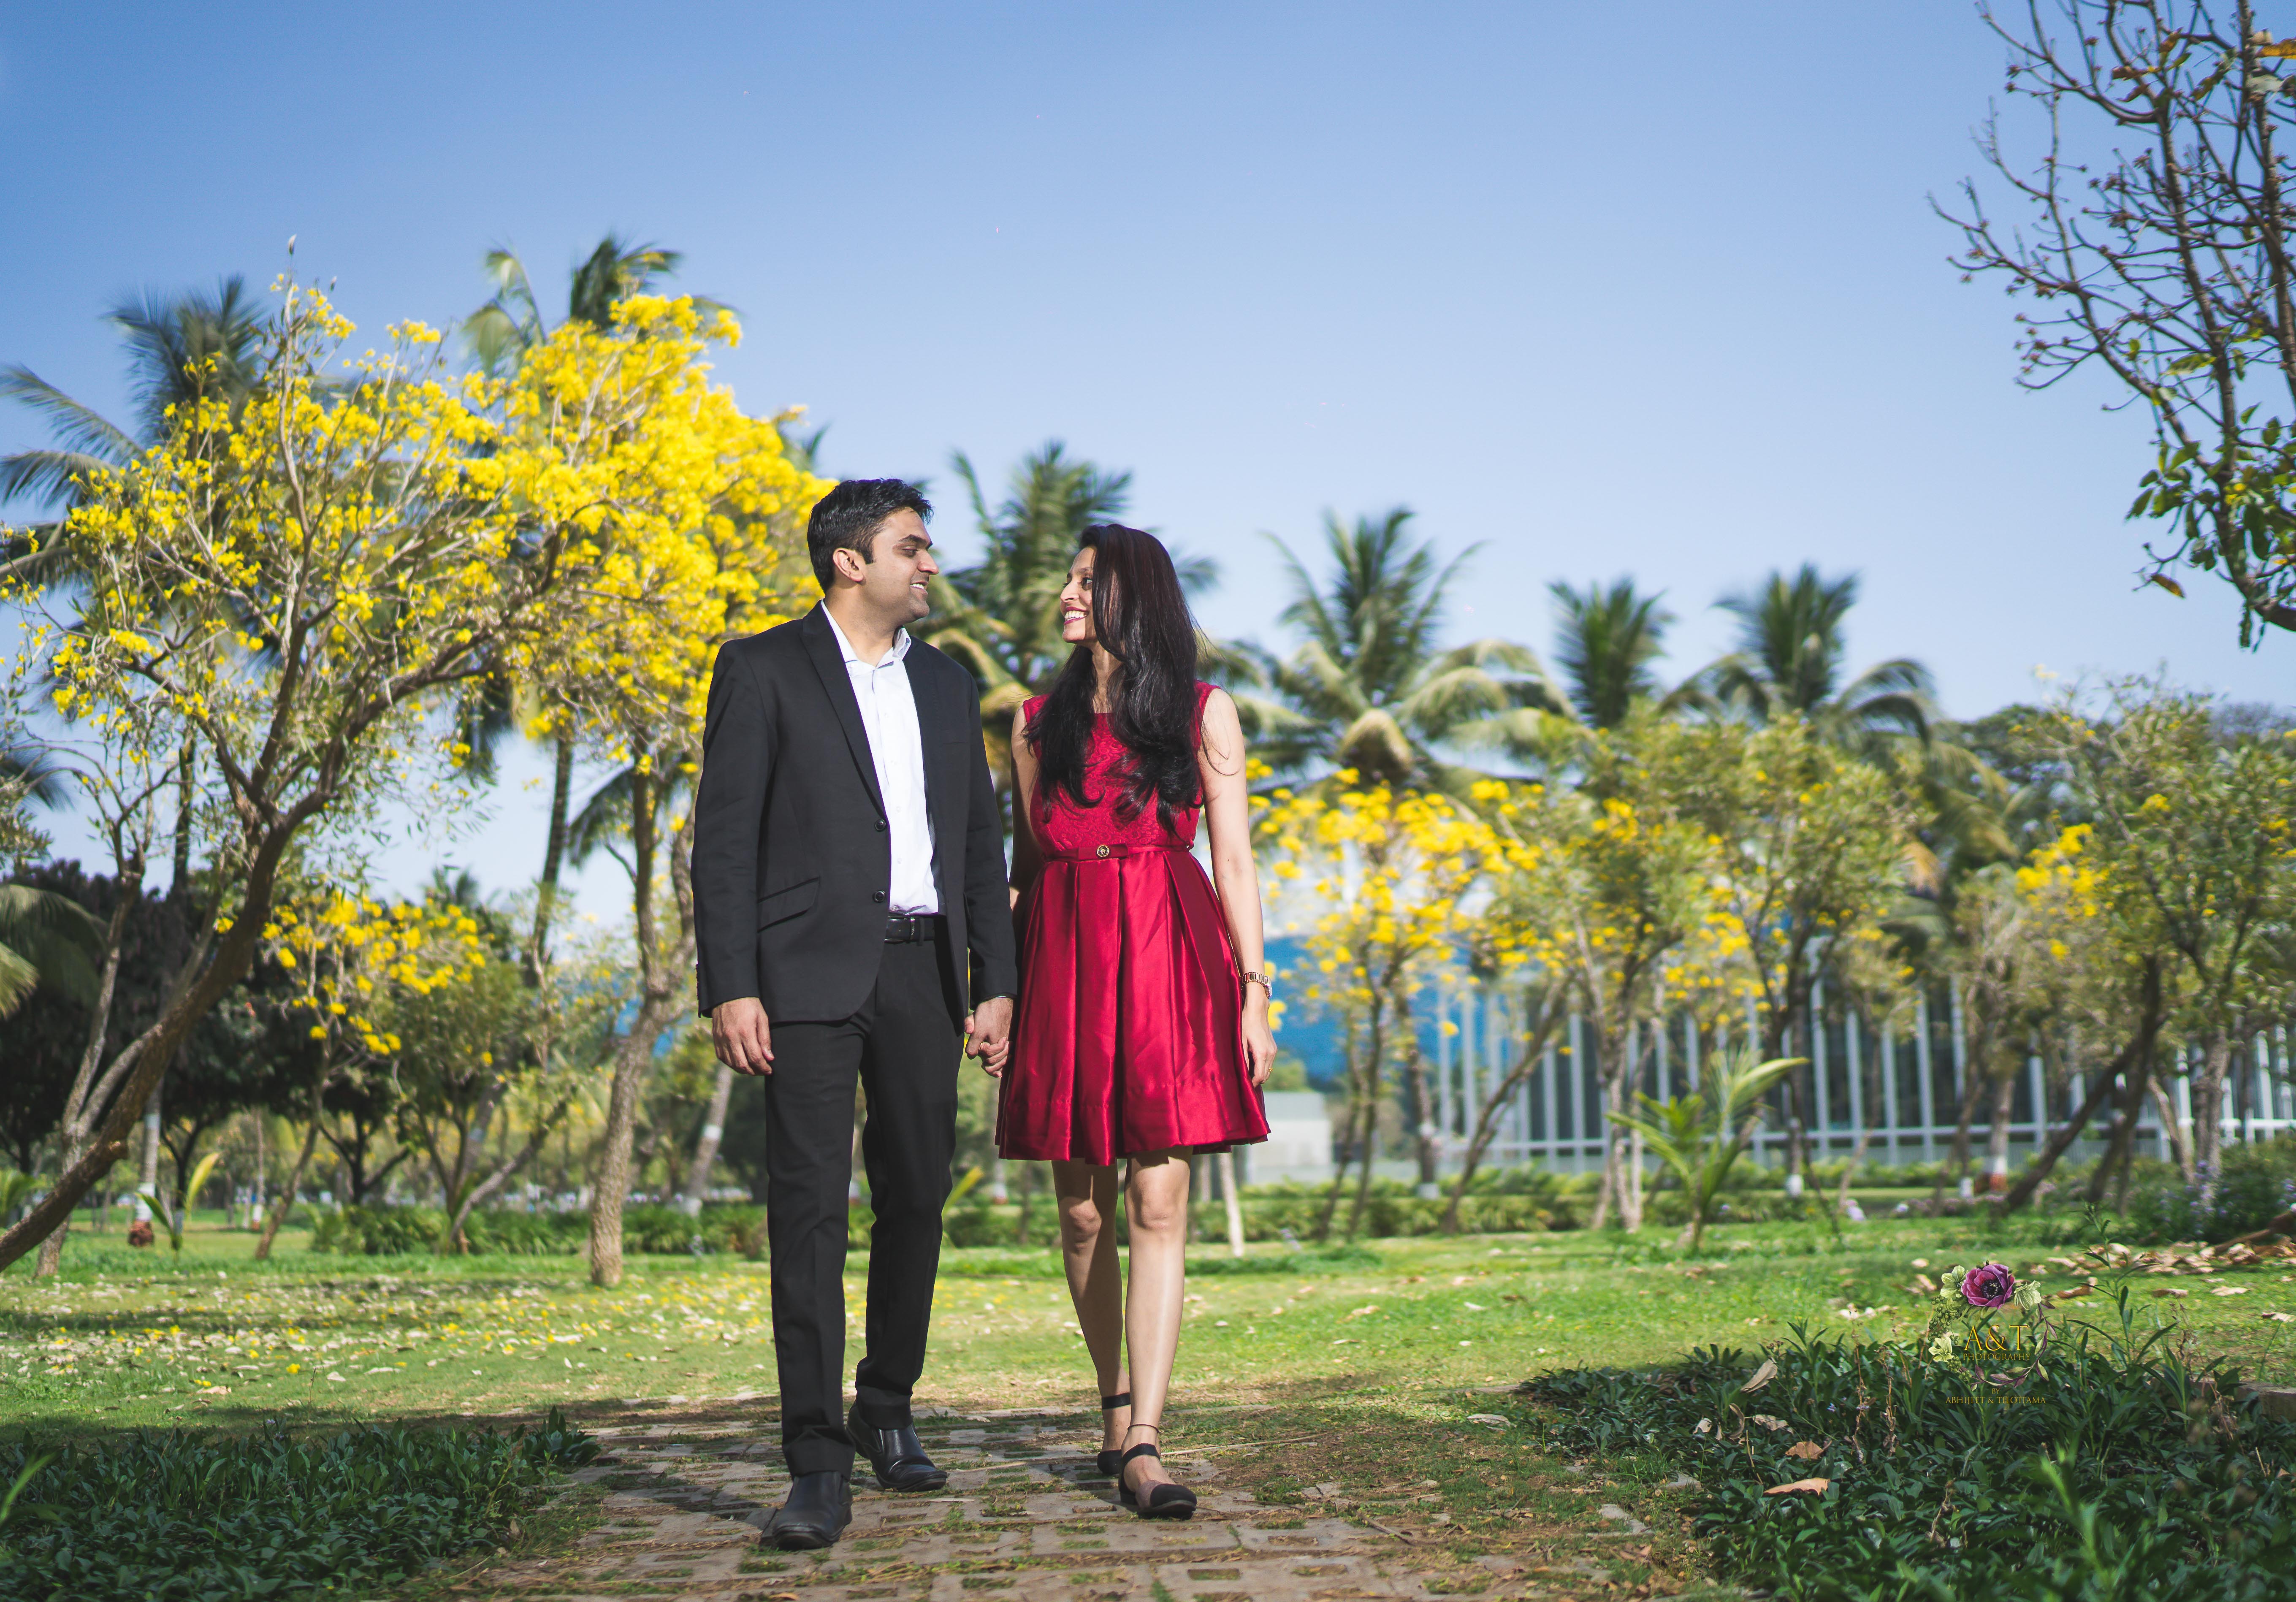 Priyanka & Swijal walking on beautiful pathway surrounded by yellow trees for their pre-wedding photoshoot in pune